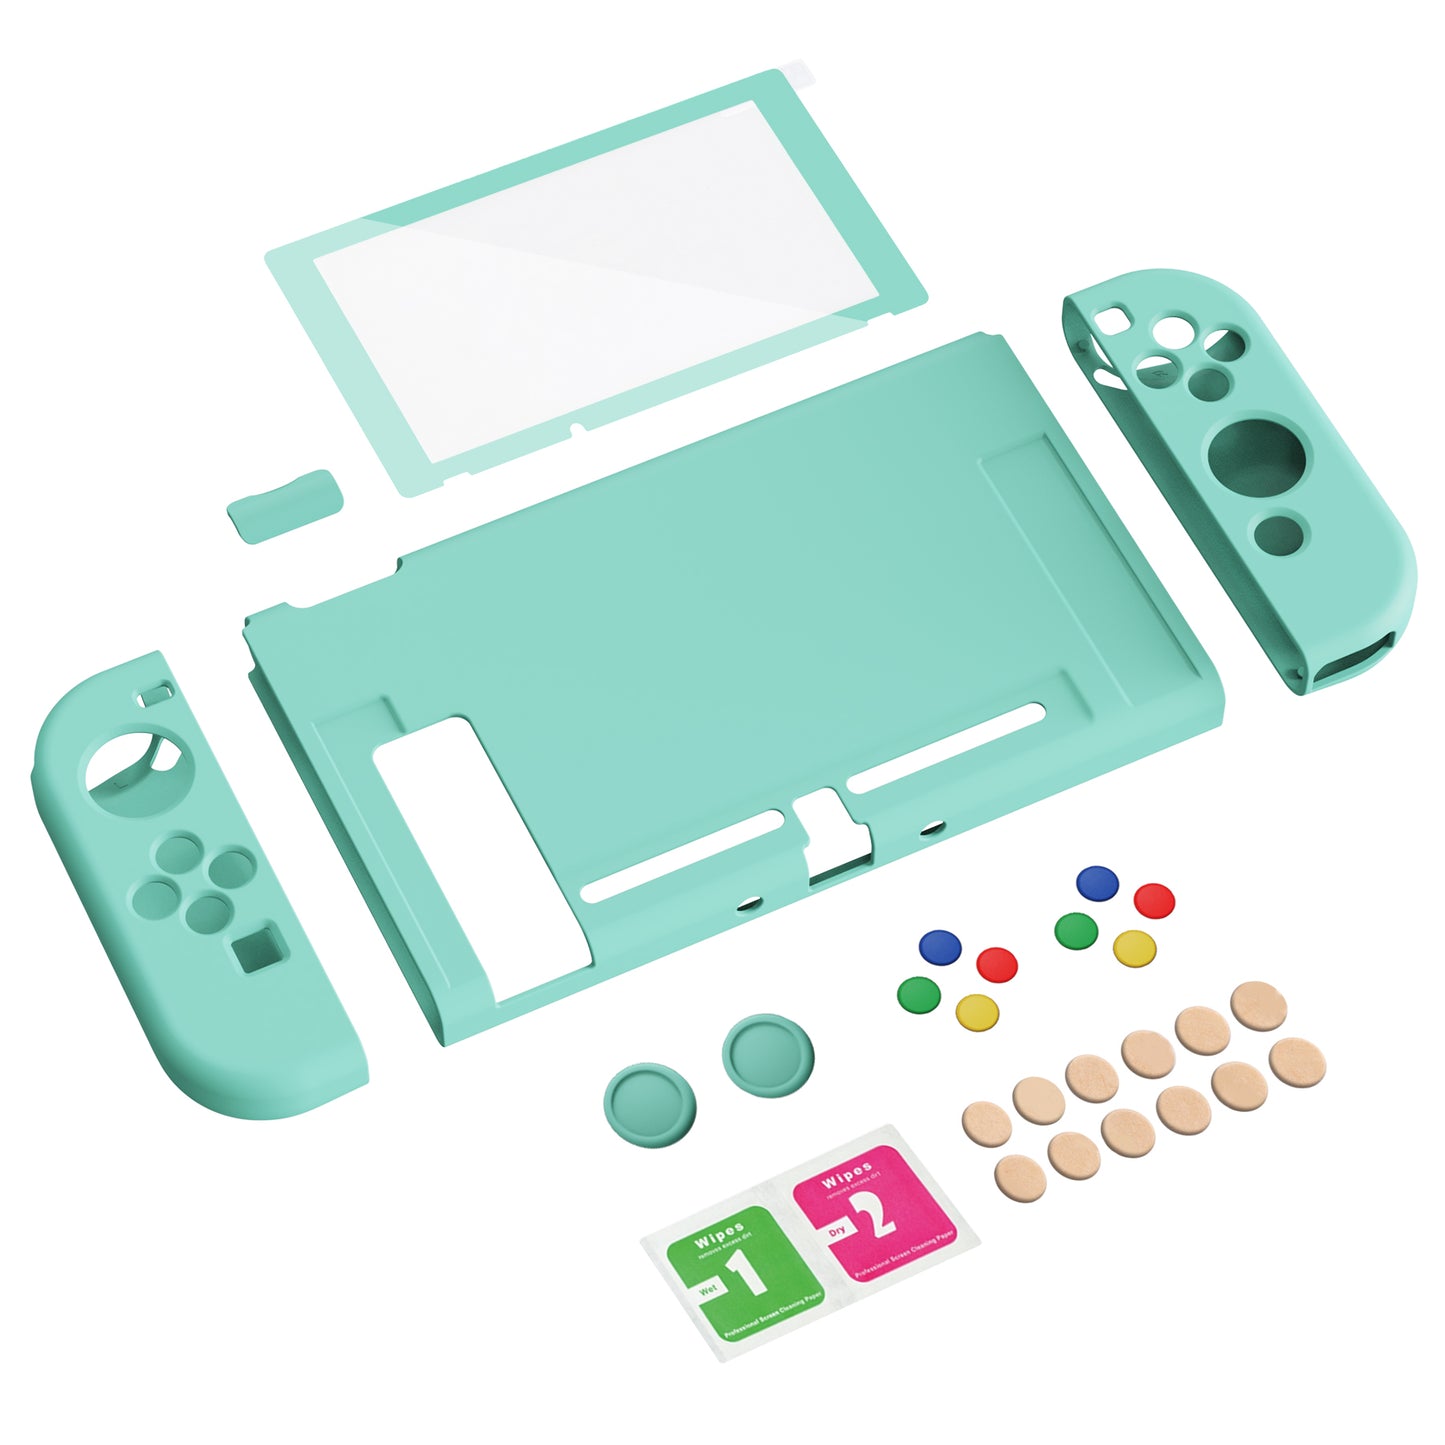 PlayVital ZealProtect Soft TPU Slim Protective Case with Tempered Glass Screen Protector & Thumb Grips & ABXY Direction Button Caps for NS Switch - Misty Green - RNSYM5004 playvital